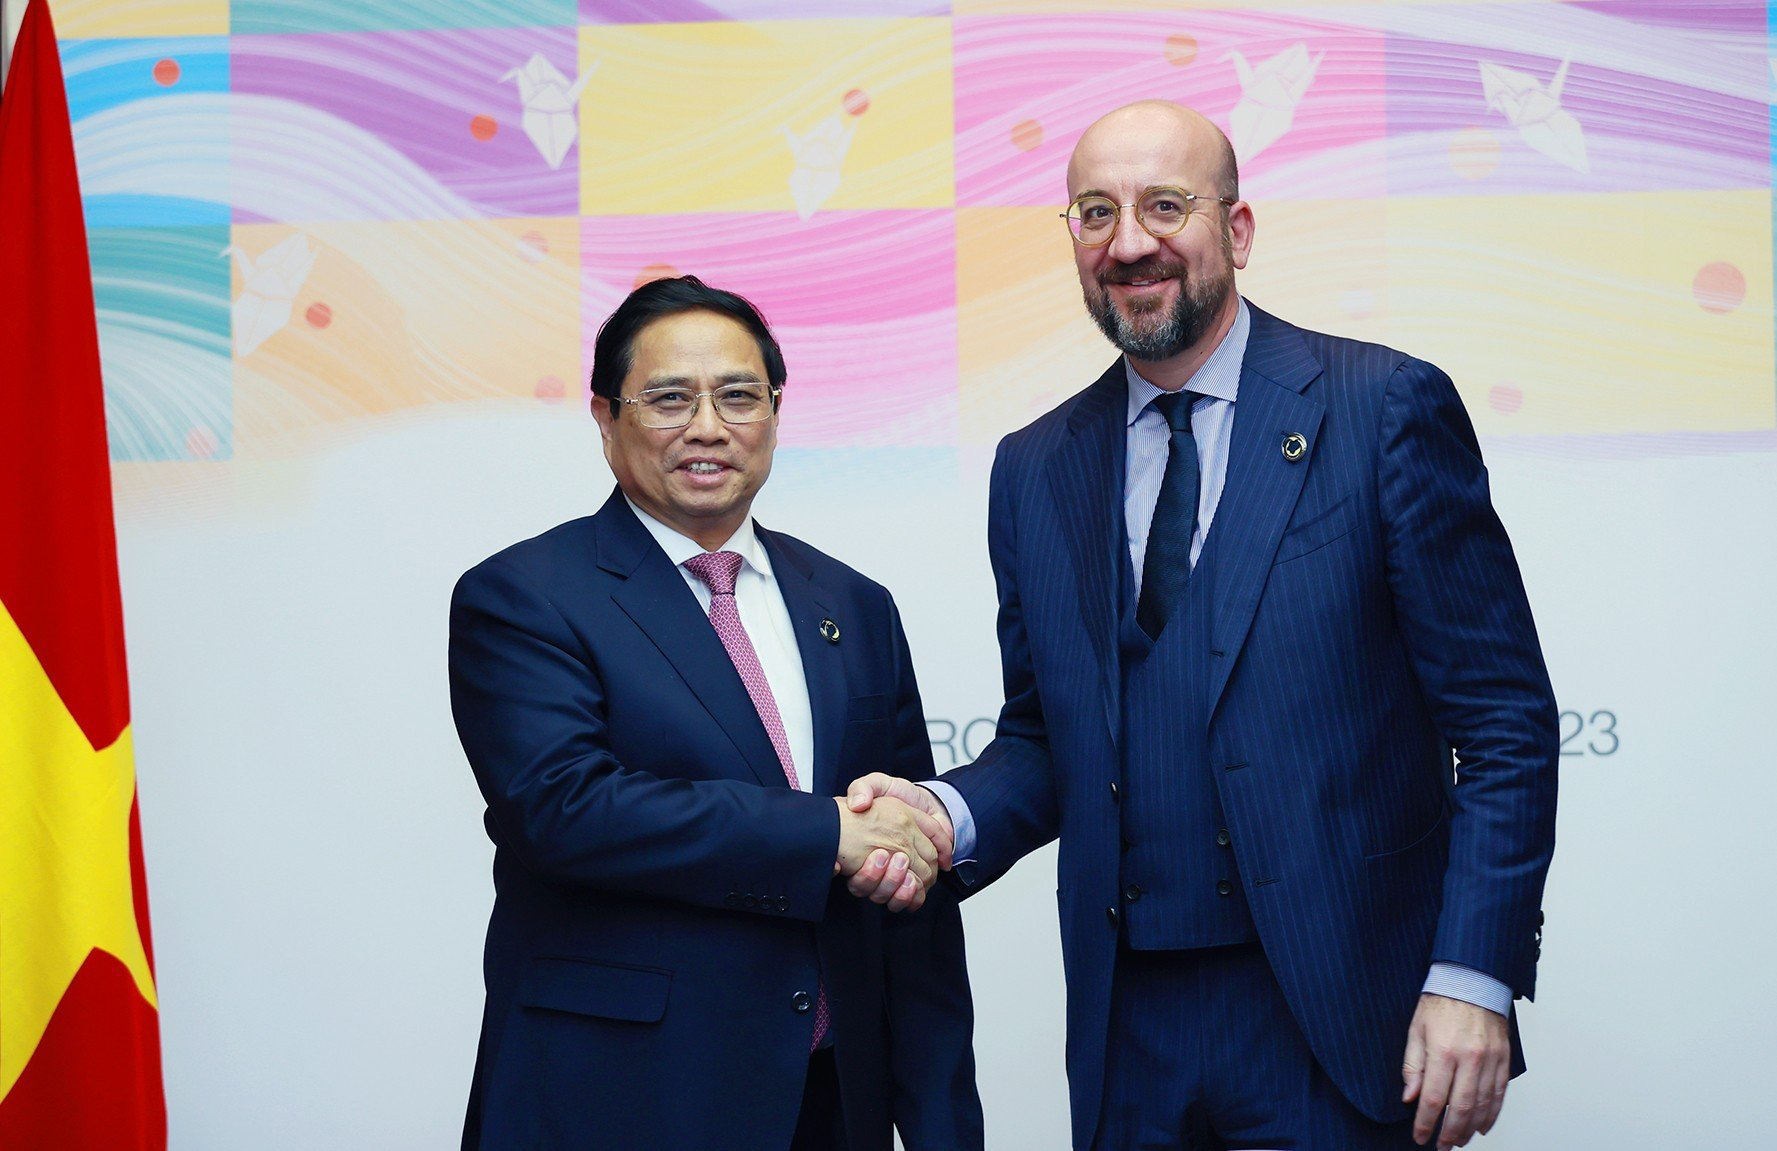 Vietnamese Prime Minister Pham Minh Chinh meets with President of the European Council Charles Michel. Photo: Duong Giang / Tuoi Tre